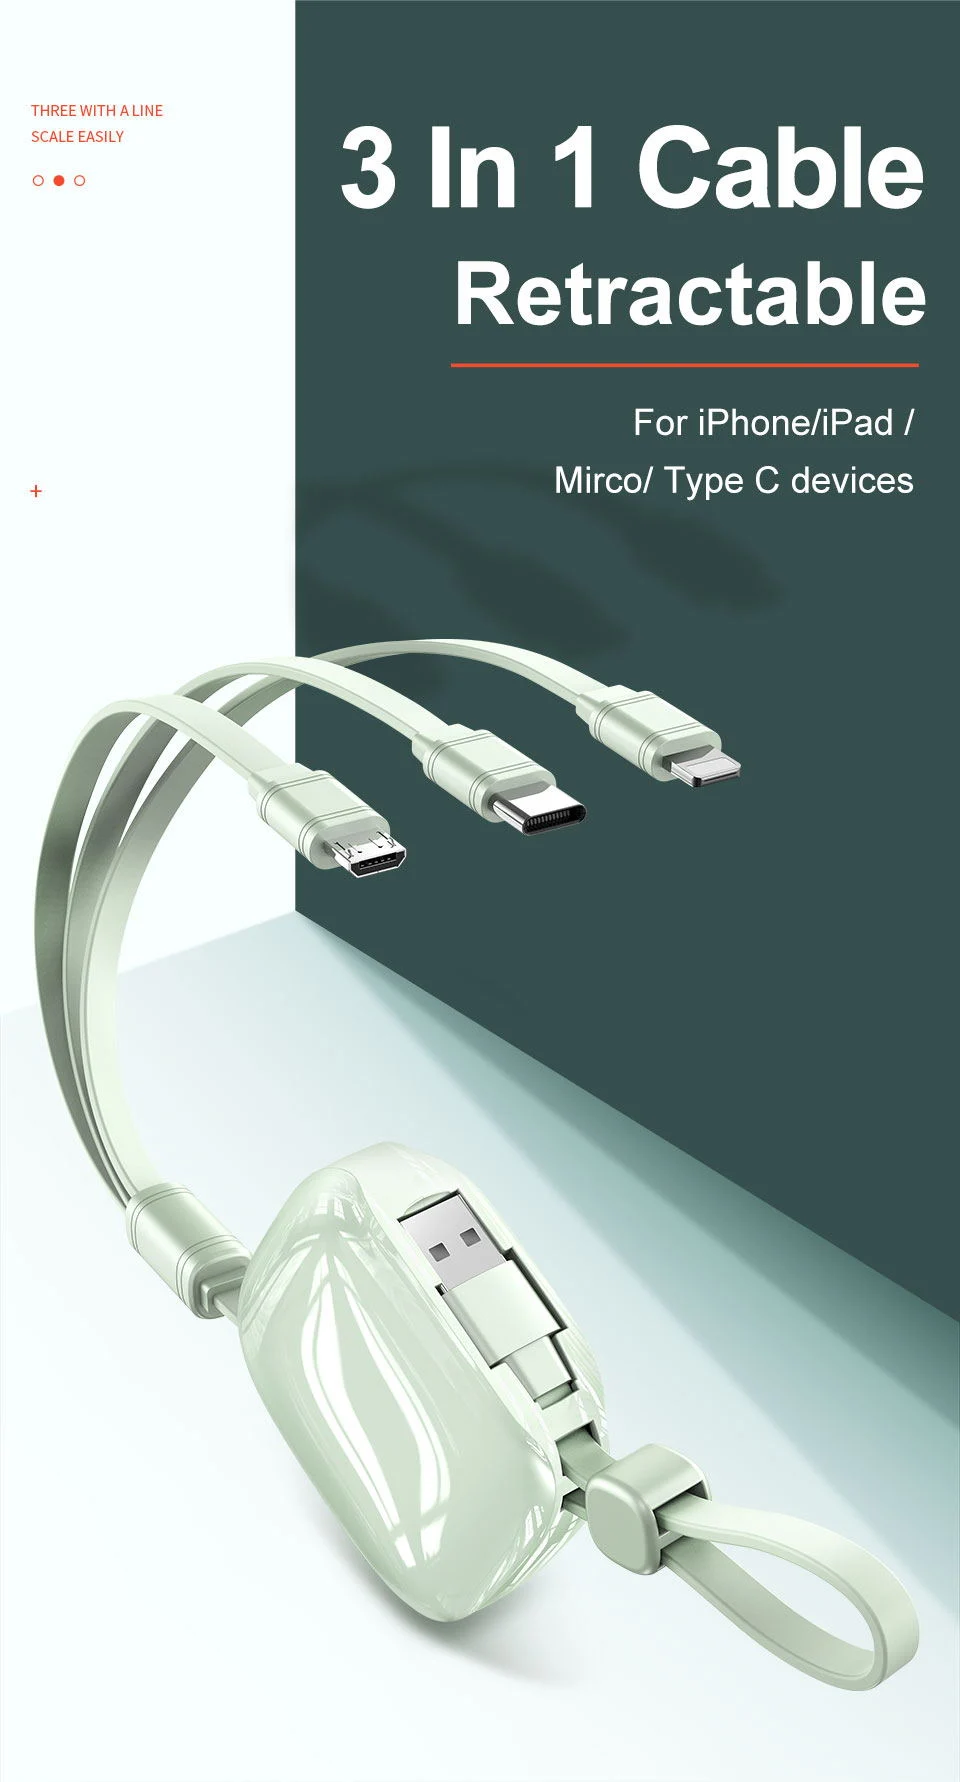 Best Selling Tongyinhai 1.2 M USB Groove Design 3A Quick Charge Retractable Cable for mobile Phone